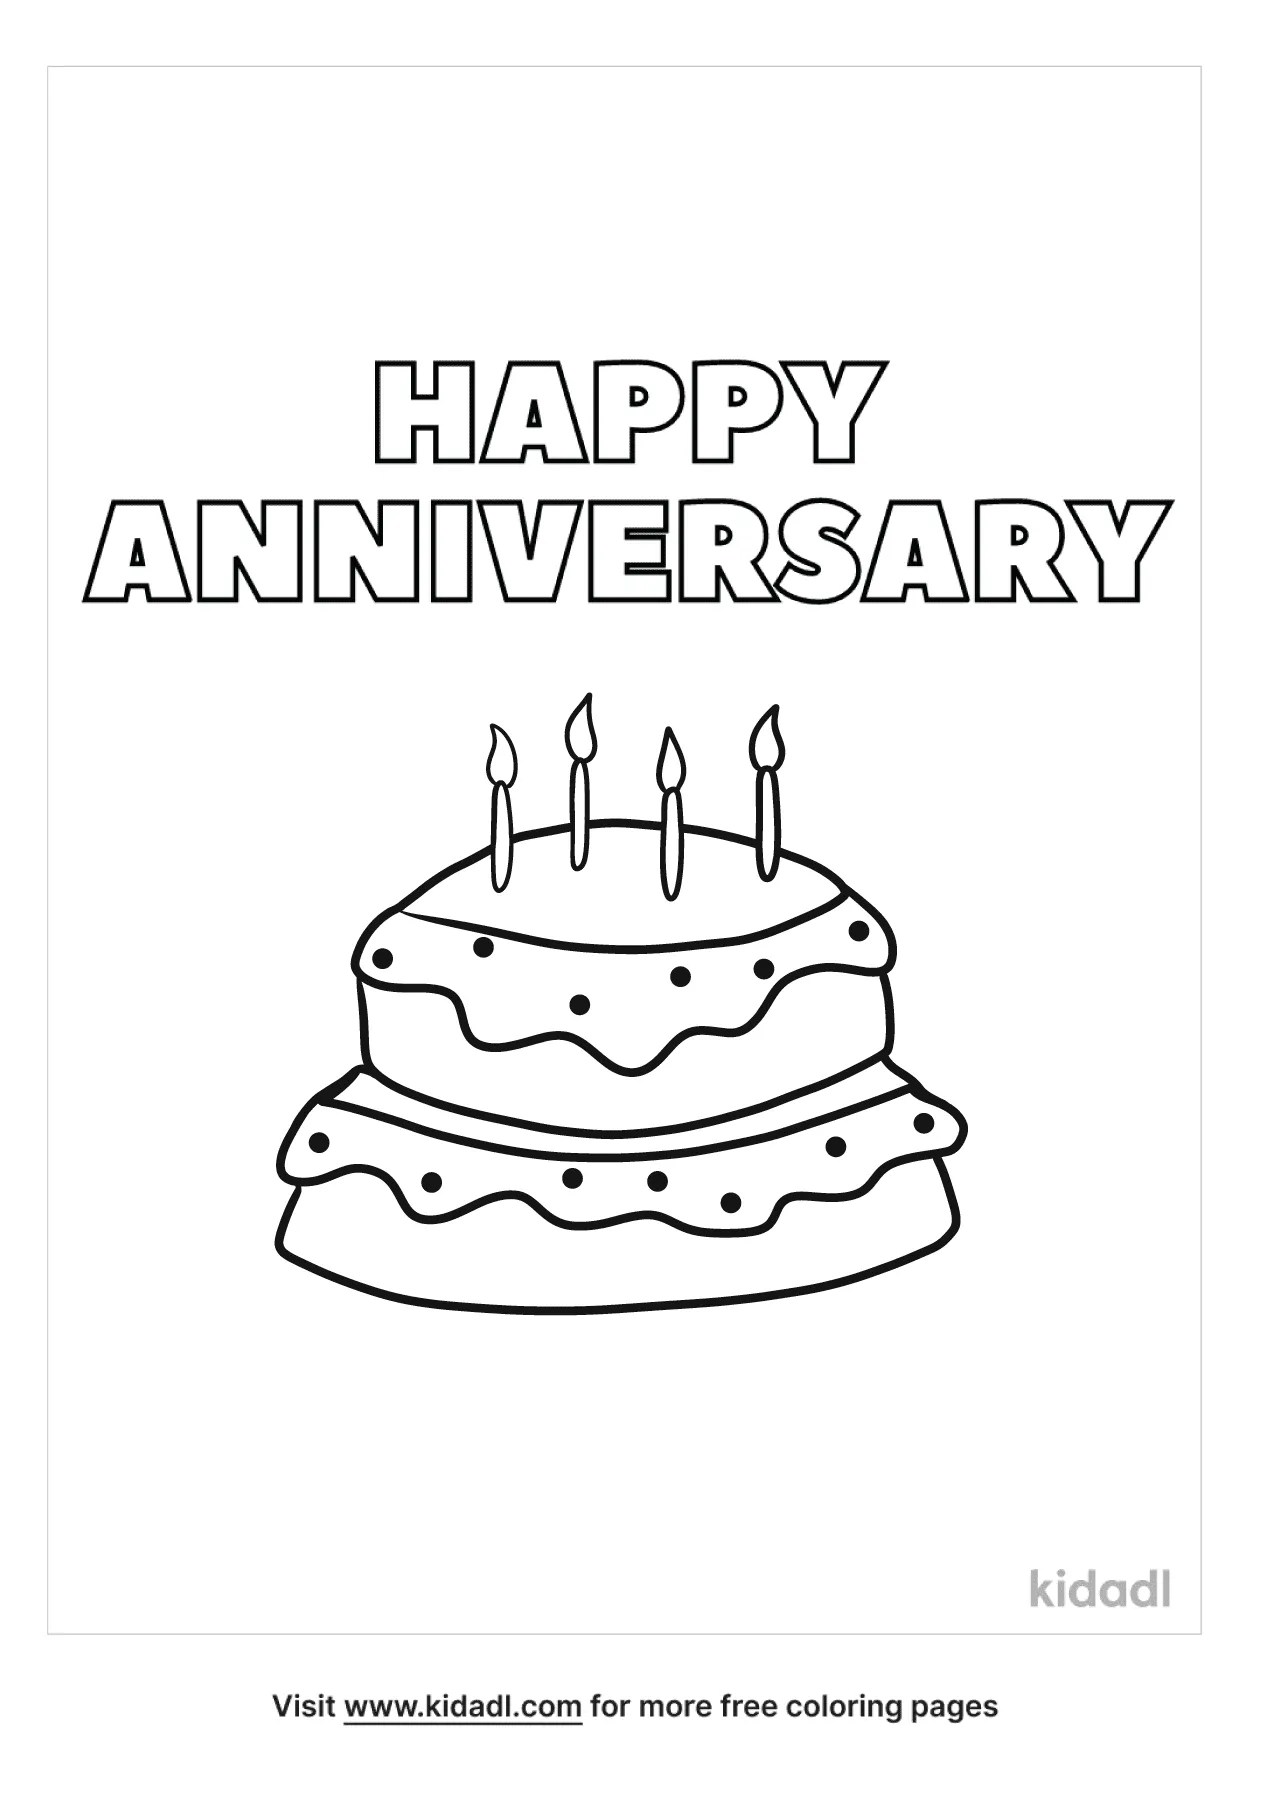 Free Happy Anniversary Coloring Page | Coloring Page Printables | Kidadl